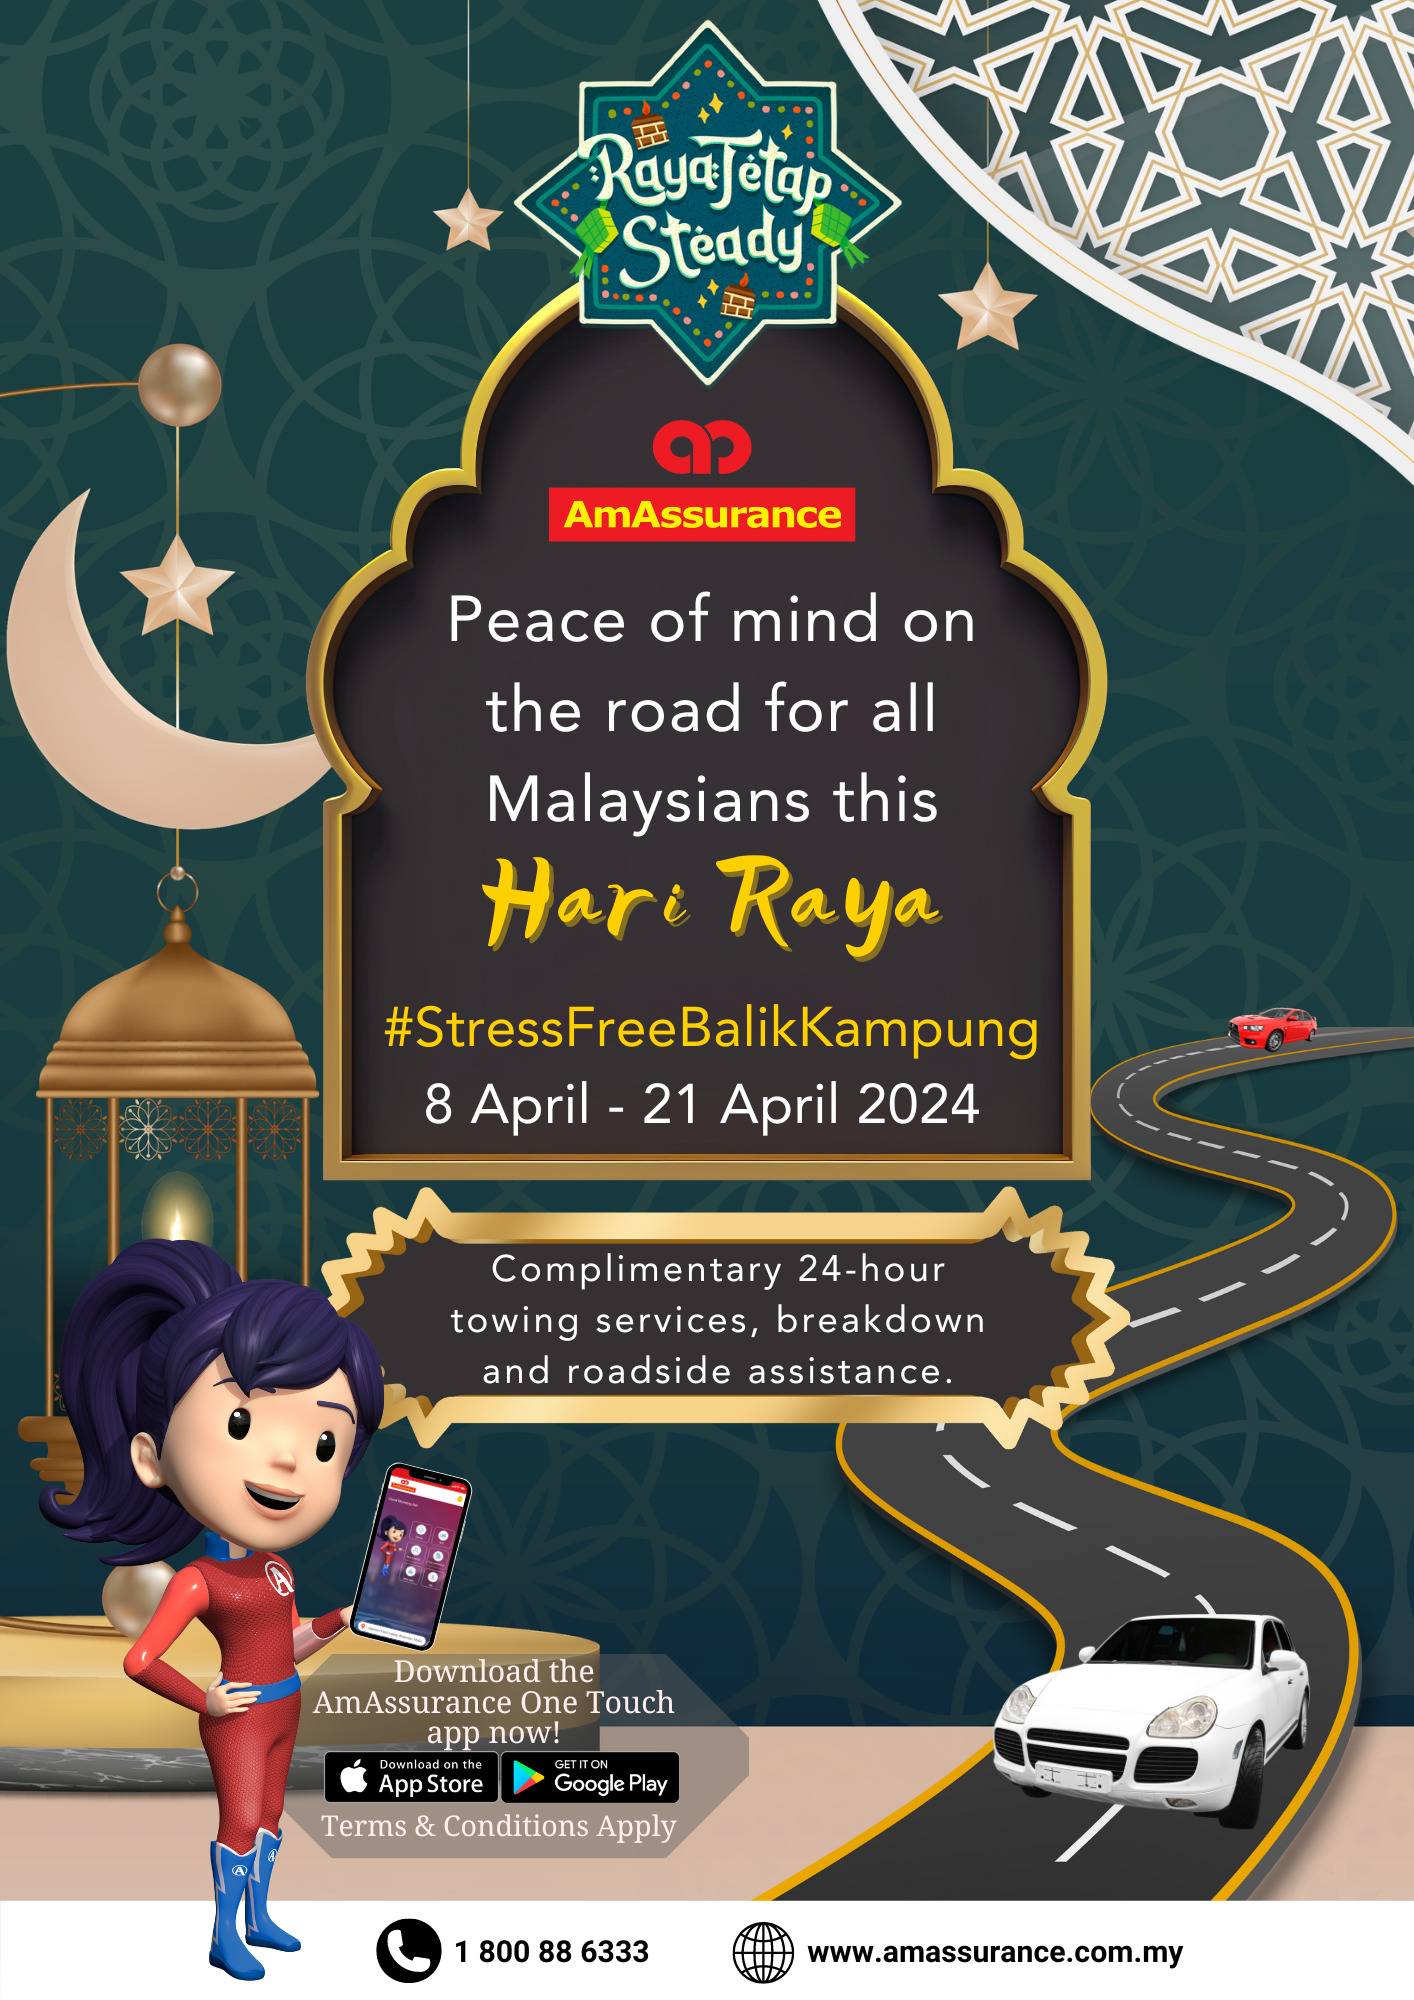 Foodies! Plan your perfect Raya road trip, worry-free